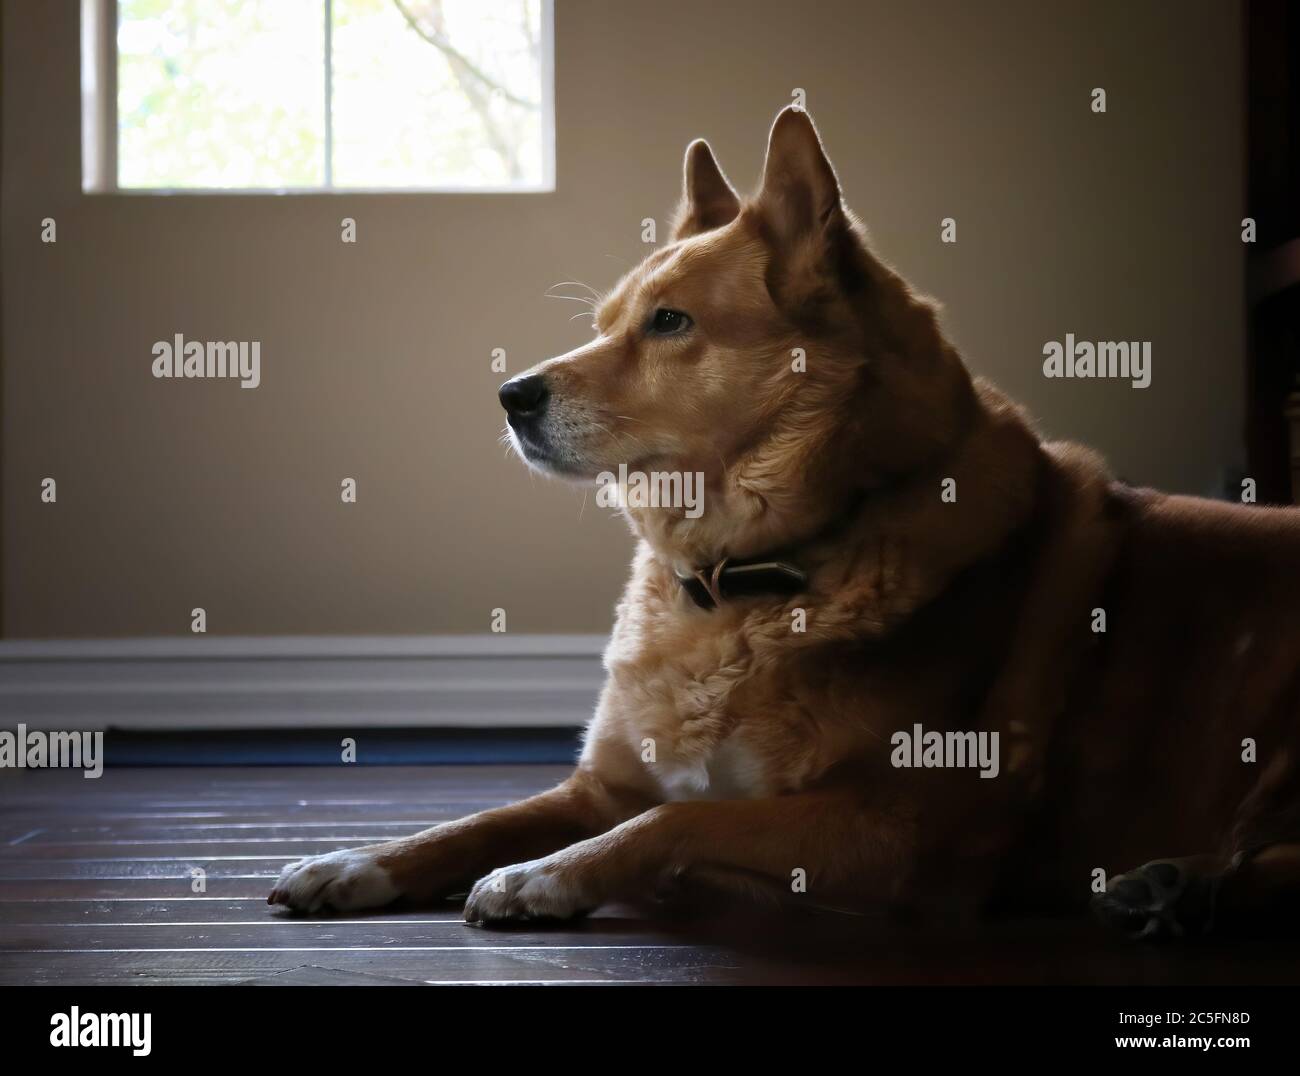 Beautiful dog with thick rust fur and bright eyes resting on wooden floor indoors with light shining on profile. Stock Photo